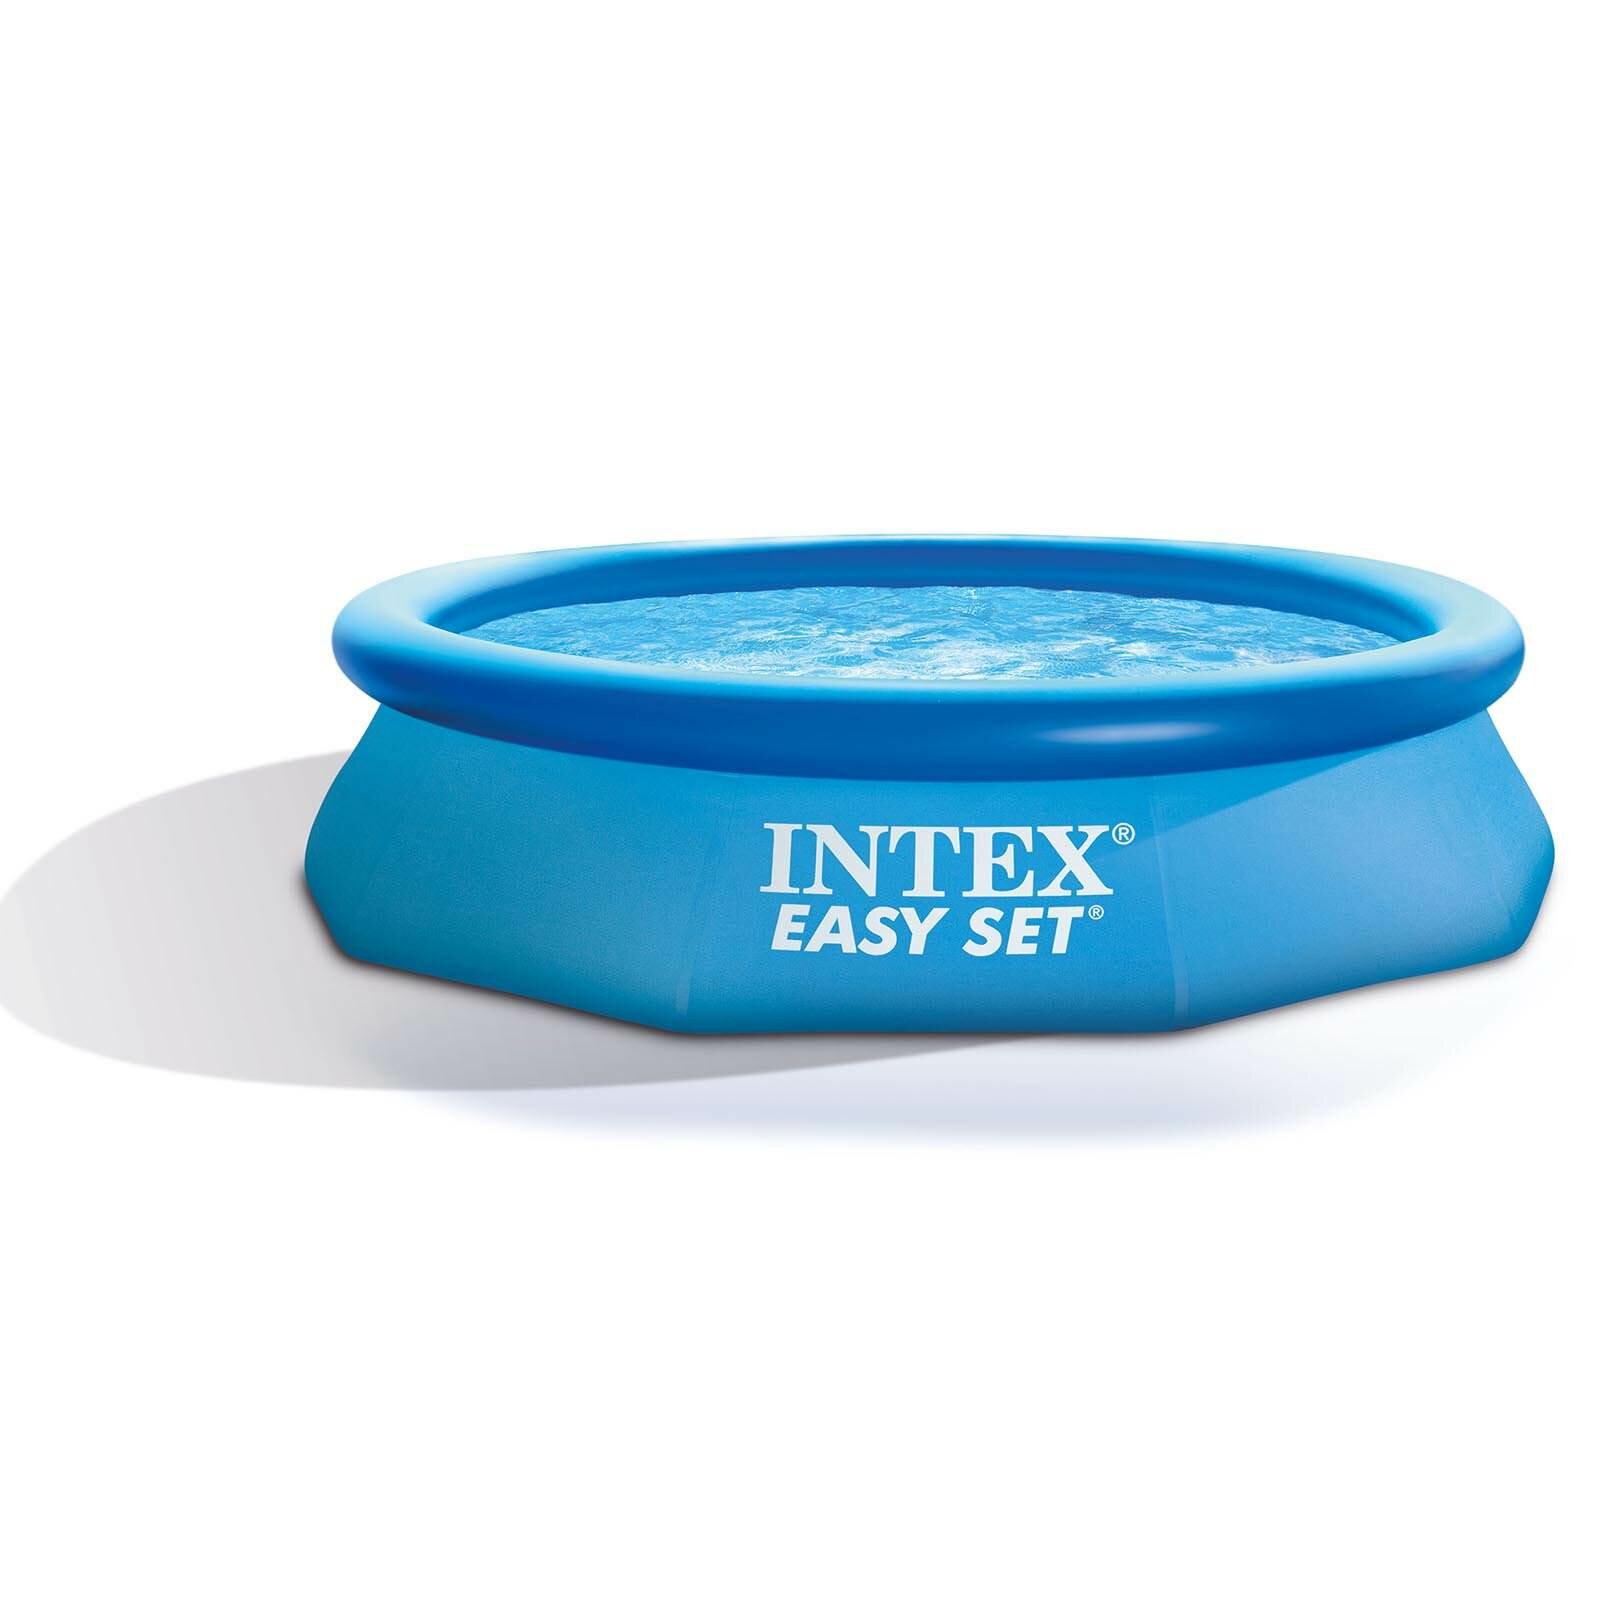 to Foranderlig Som Intex 10ft Round Swimming Pool Cover & Easy Set 10ft x 30in Inflatable Pool  & Reviews | Wayfair